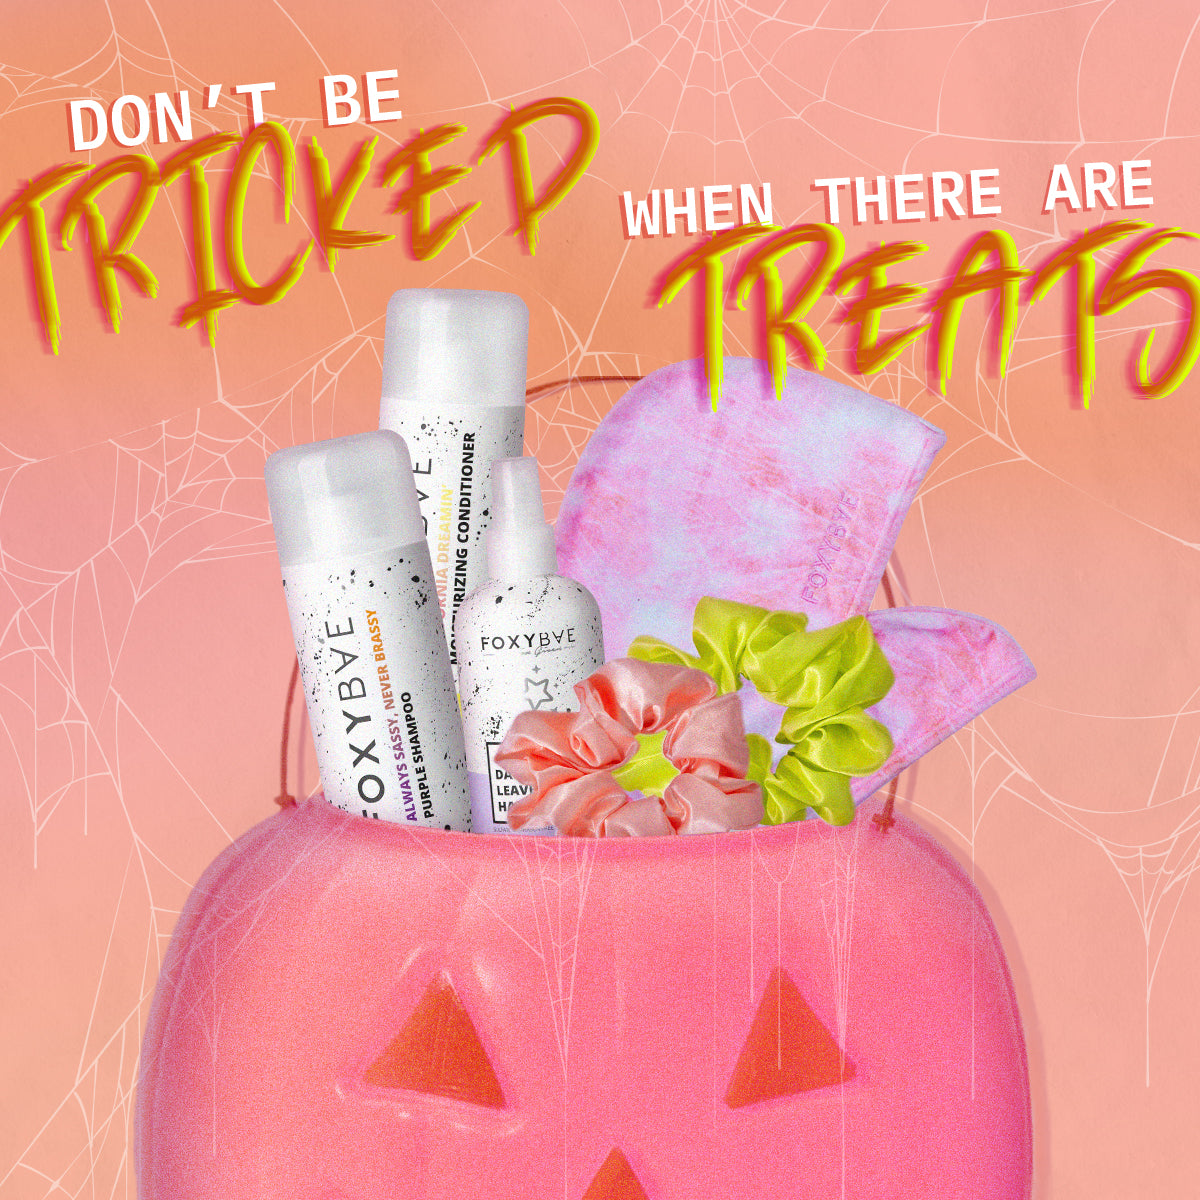 Don't Get Tricked When There Are Treats! image